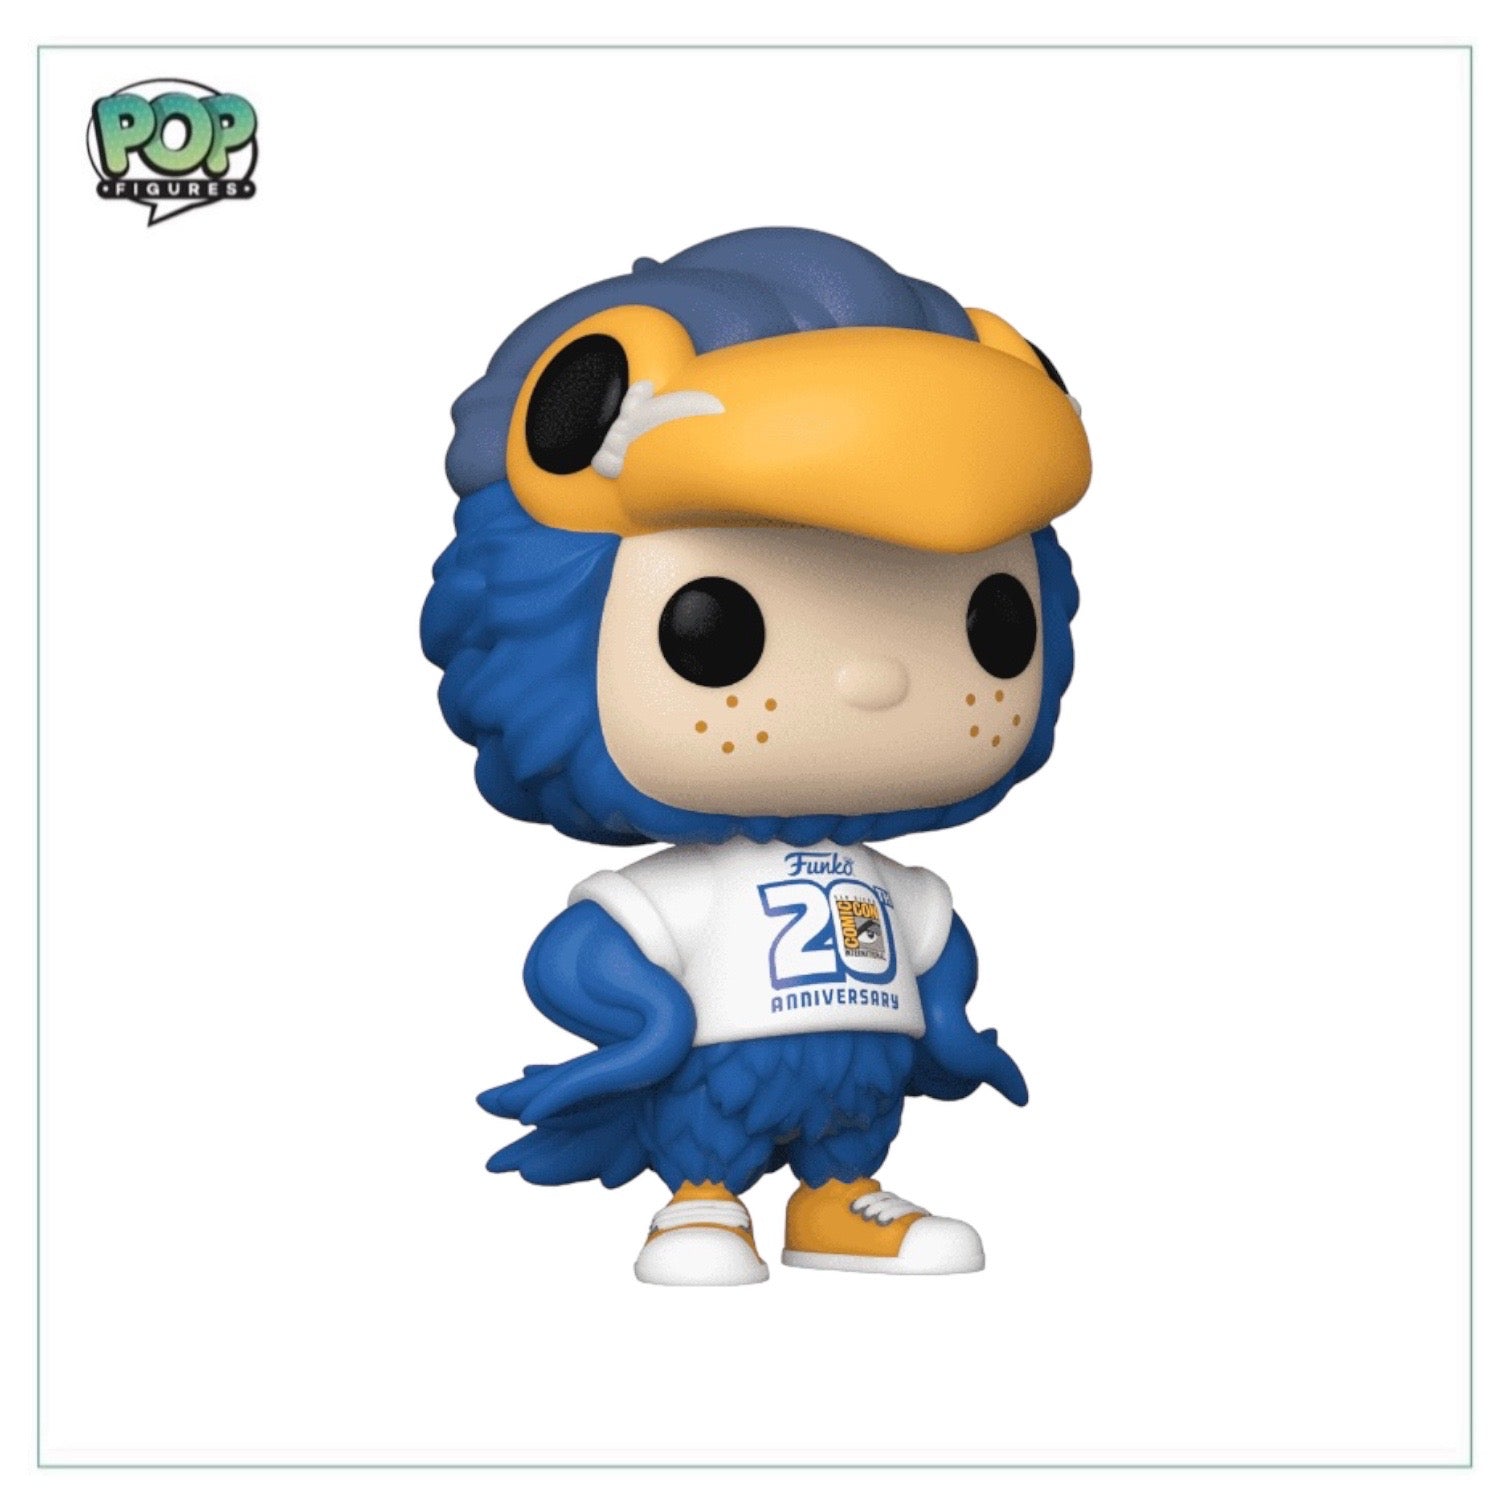 Freddy Funko as Toucan Funko Pop! - SDCC 2023 Shared Exclusive